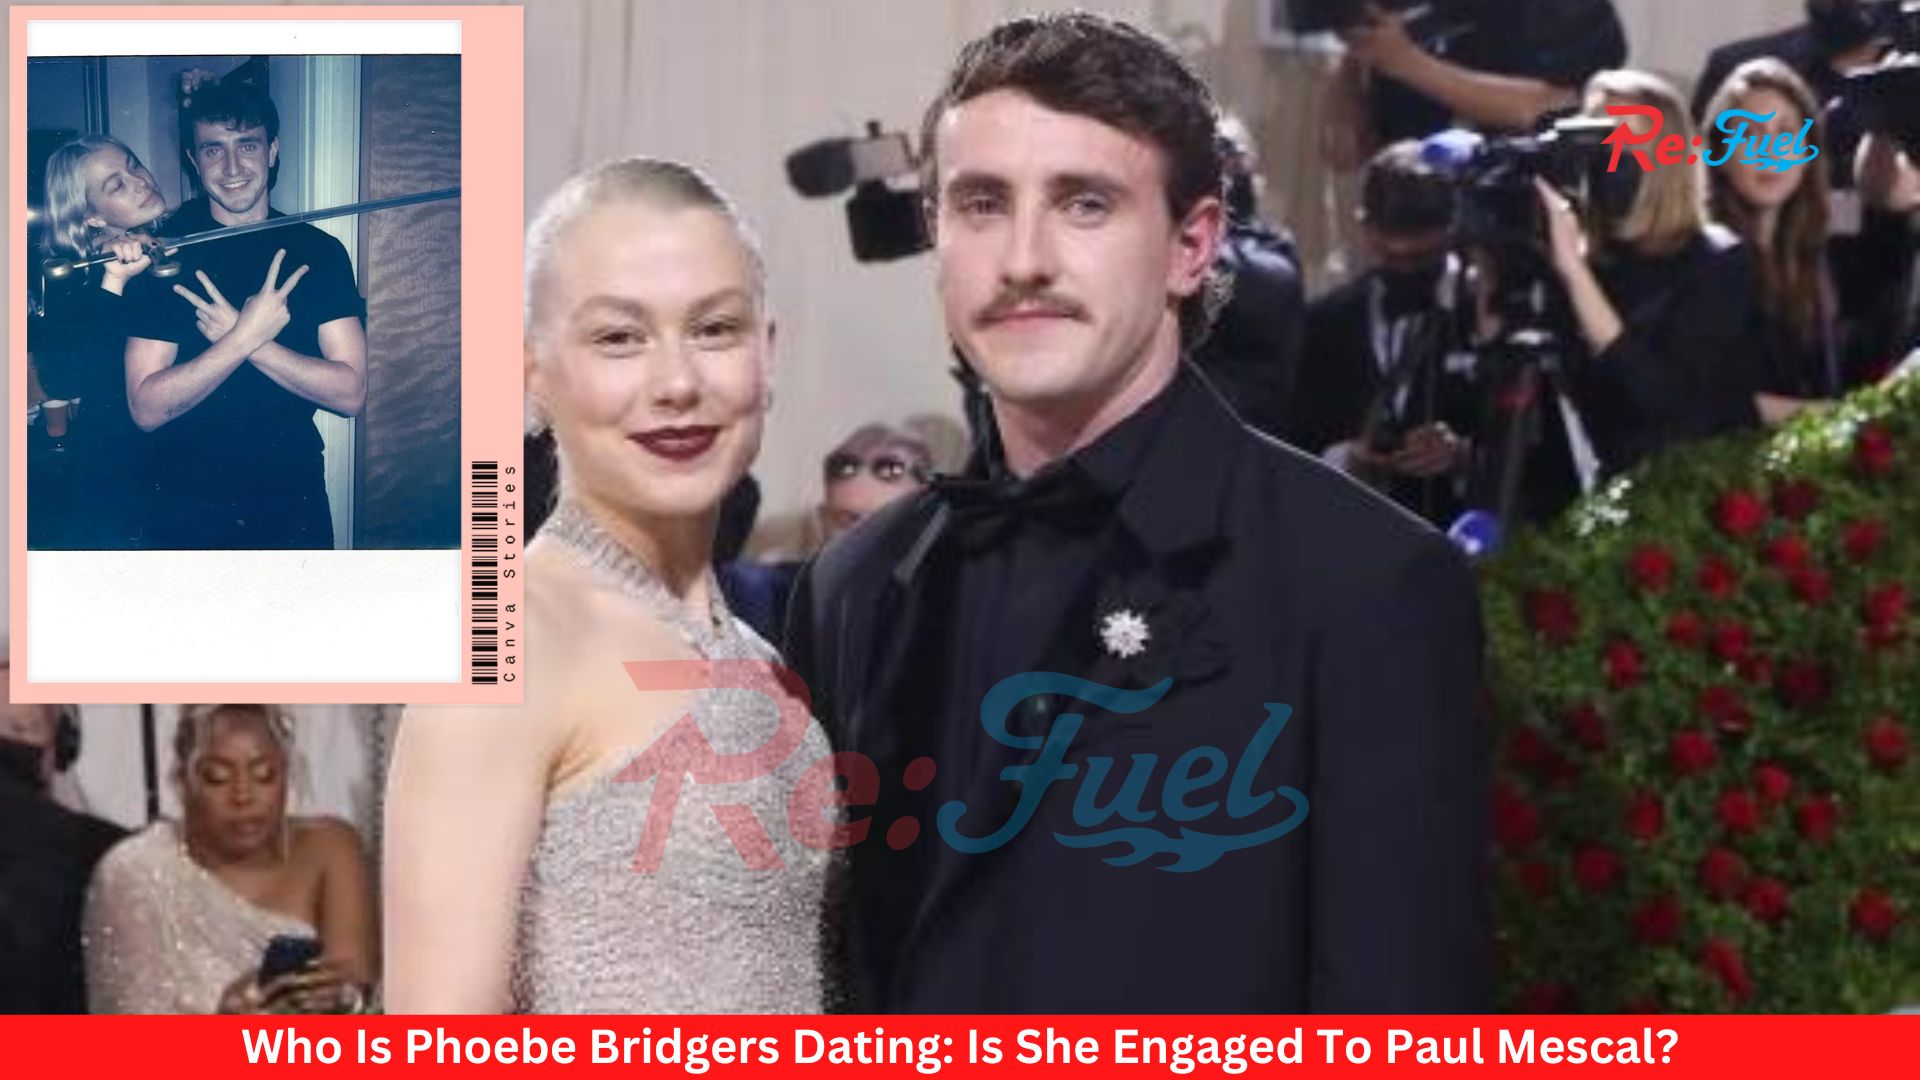 Who Is Phoebe Bridgers Dating: Is She Engaged To Paul Mescal?